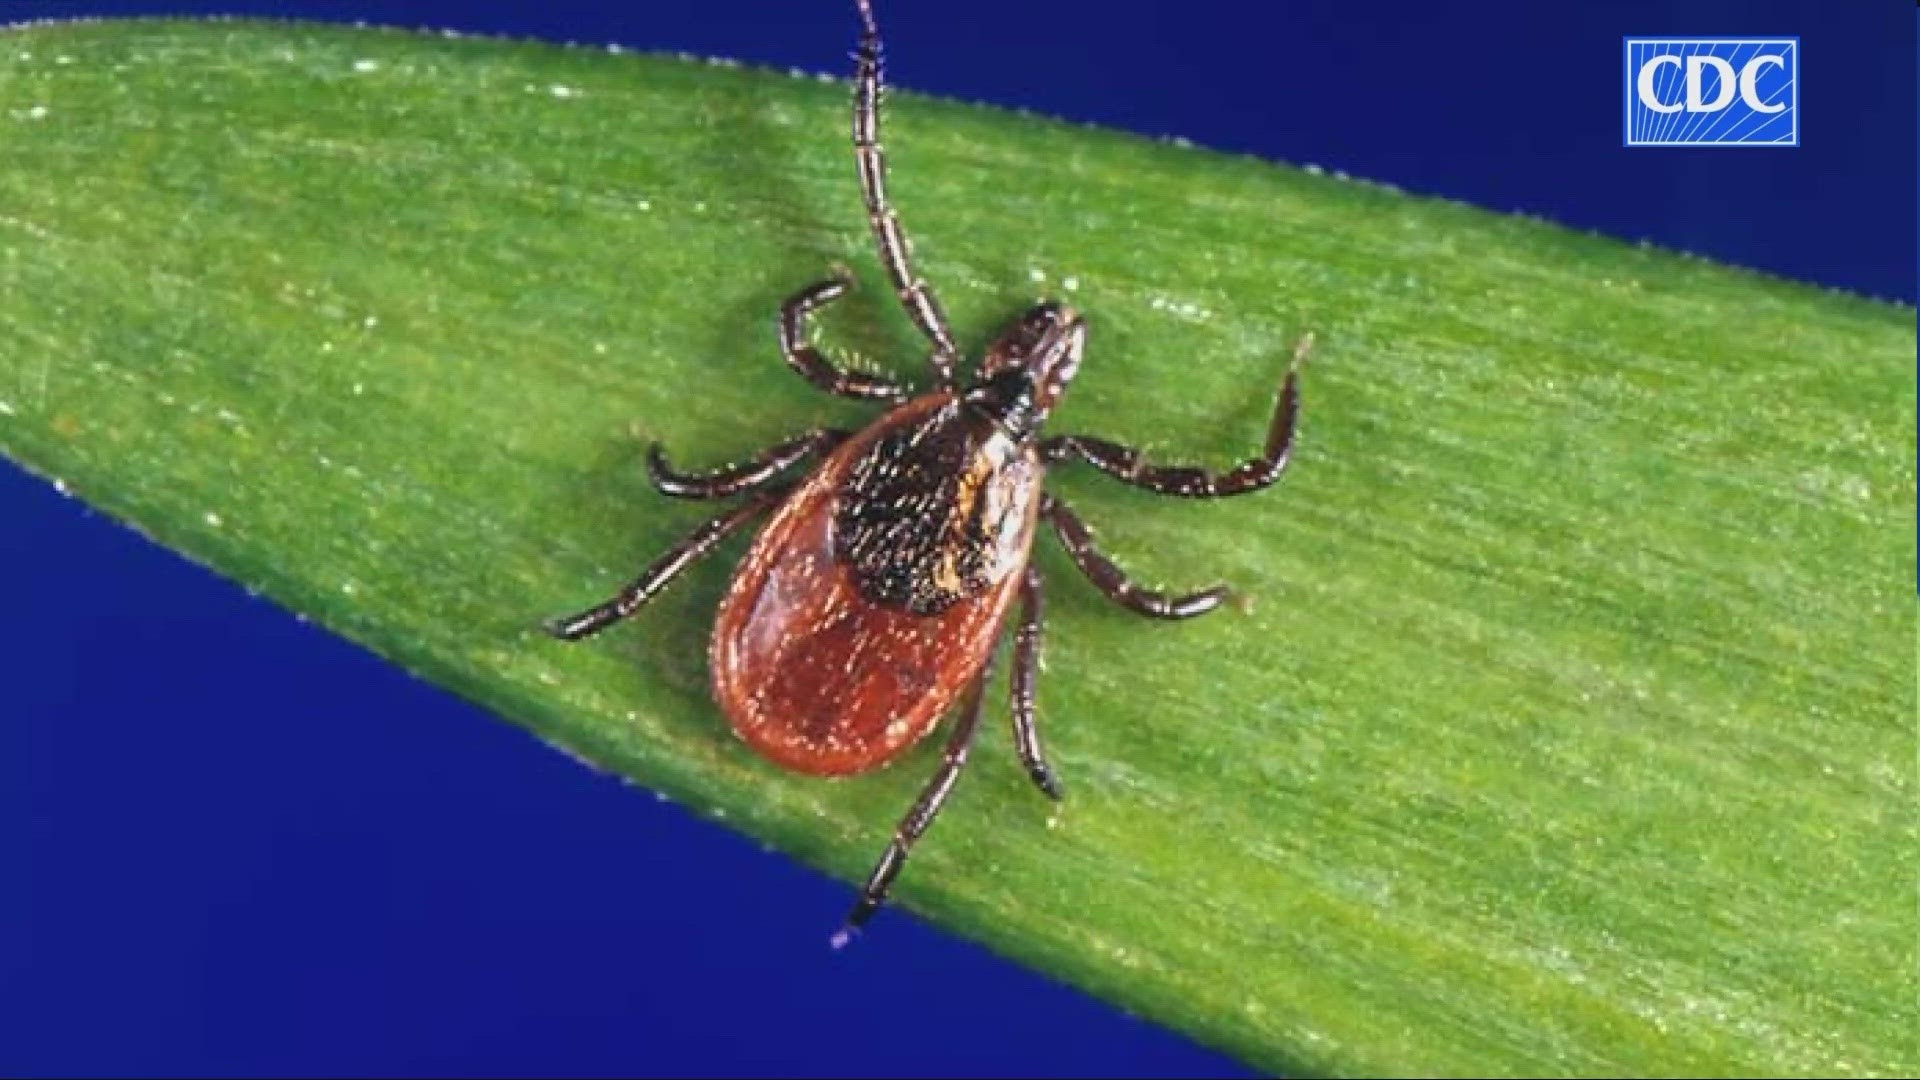 Cases of Lyme disease are rising in Ohio, so it’s worth doing daily tick checks, especially if you’ve been spending time outdoors near the woods.